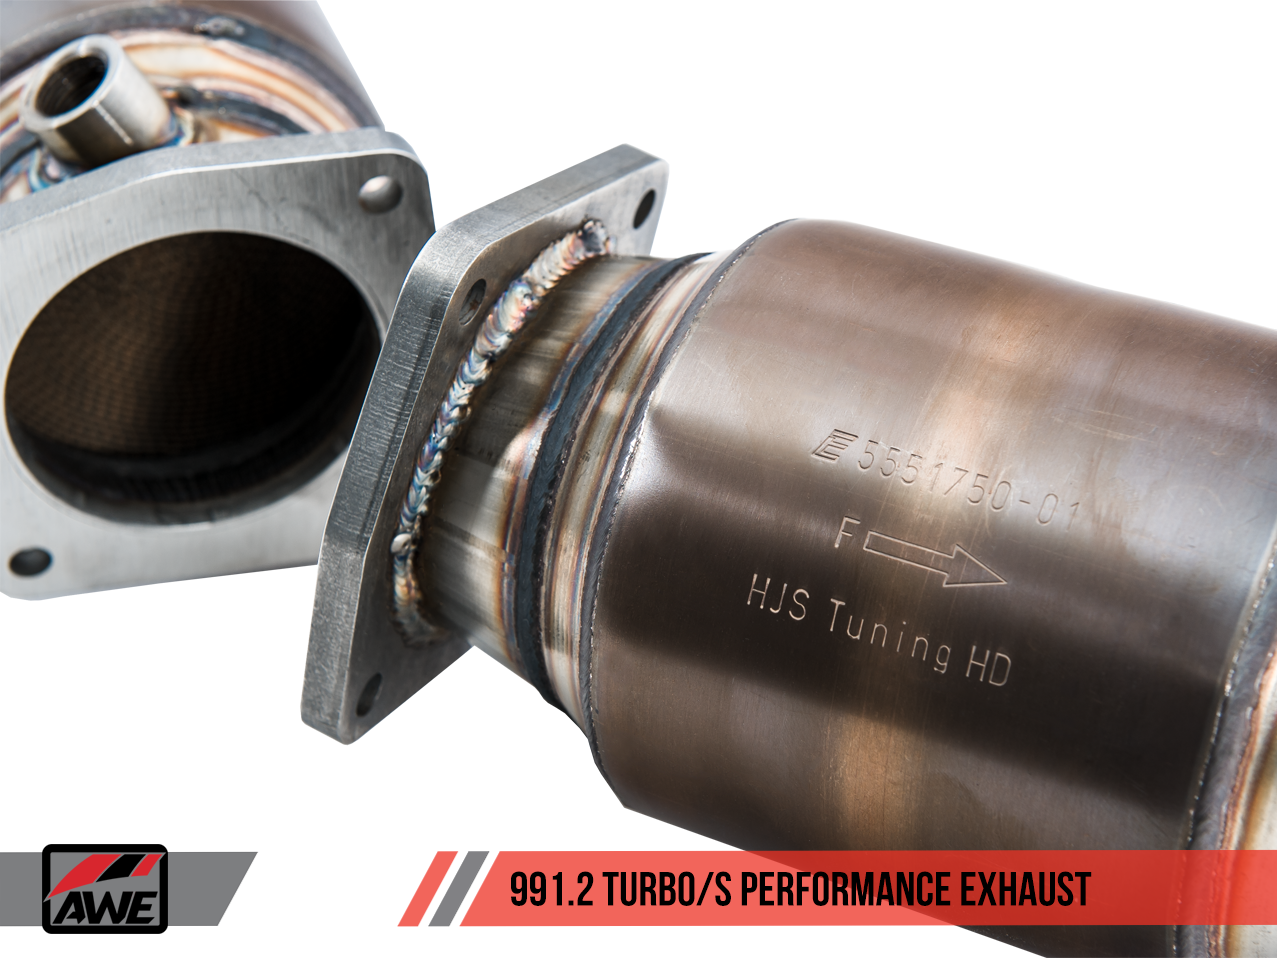 Awe Performance Exhaust And High Flow Cat Sections For Porsche 991 2 T Park Auto Motorsports